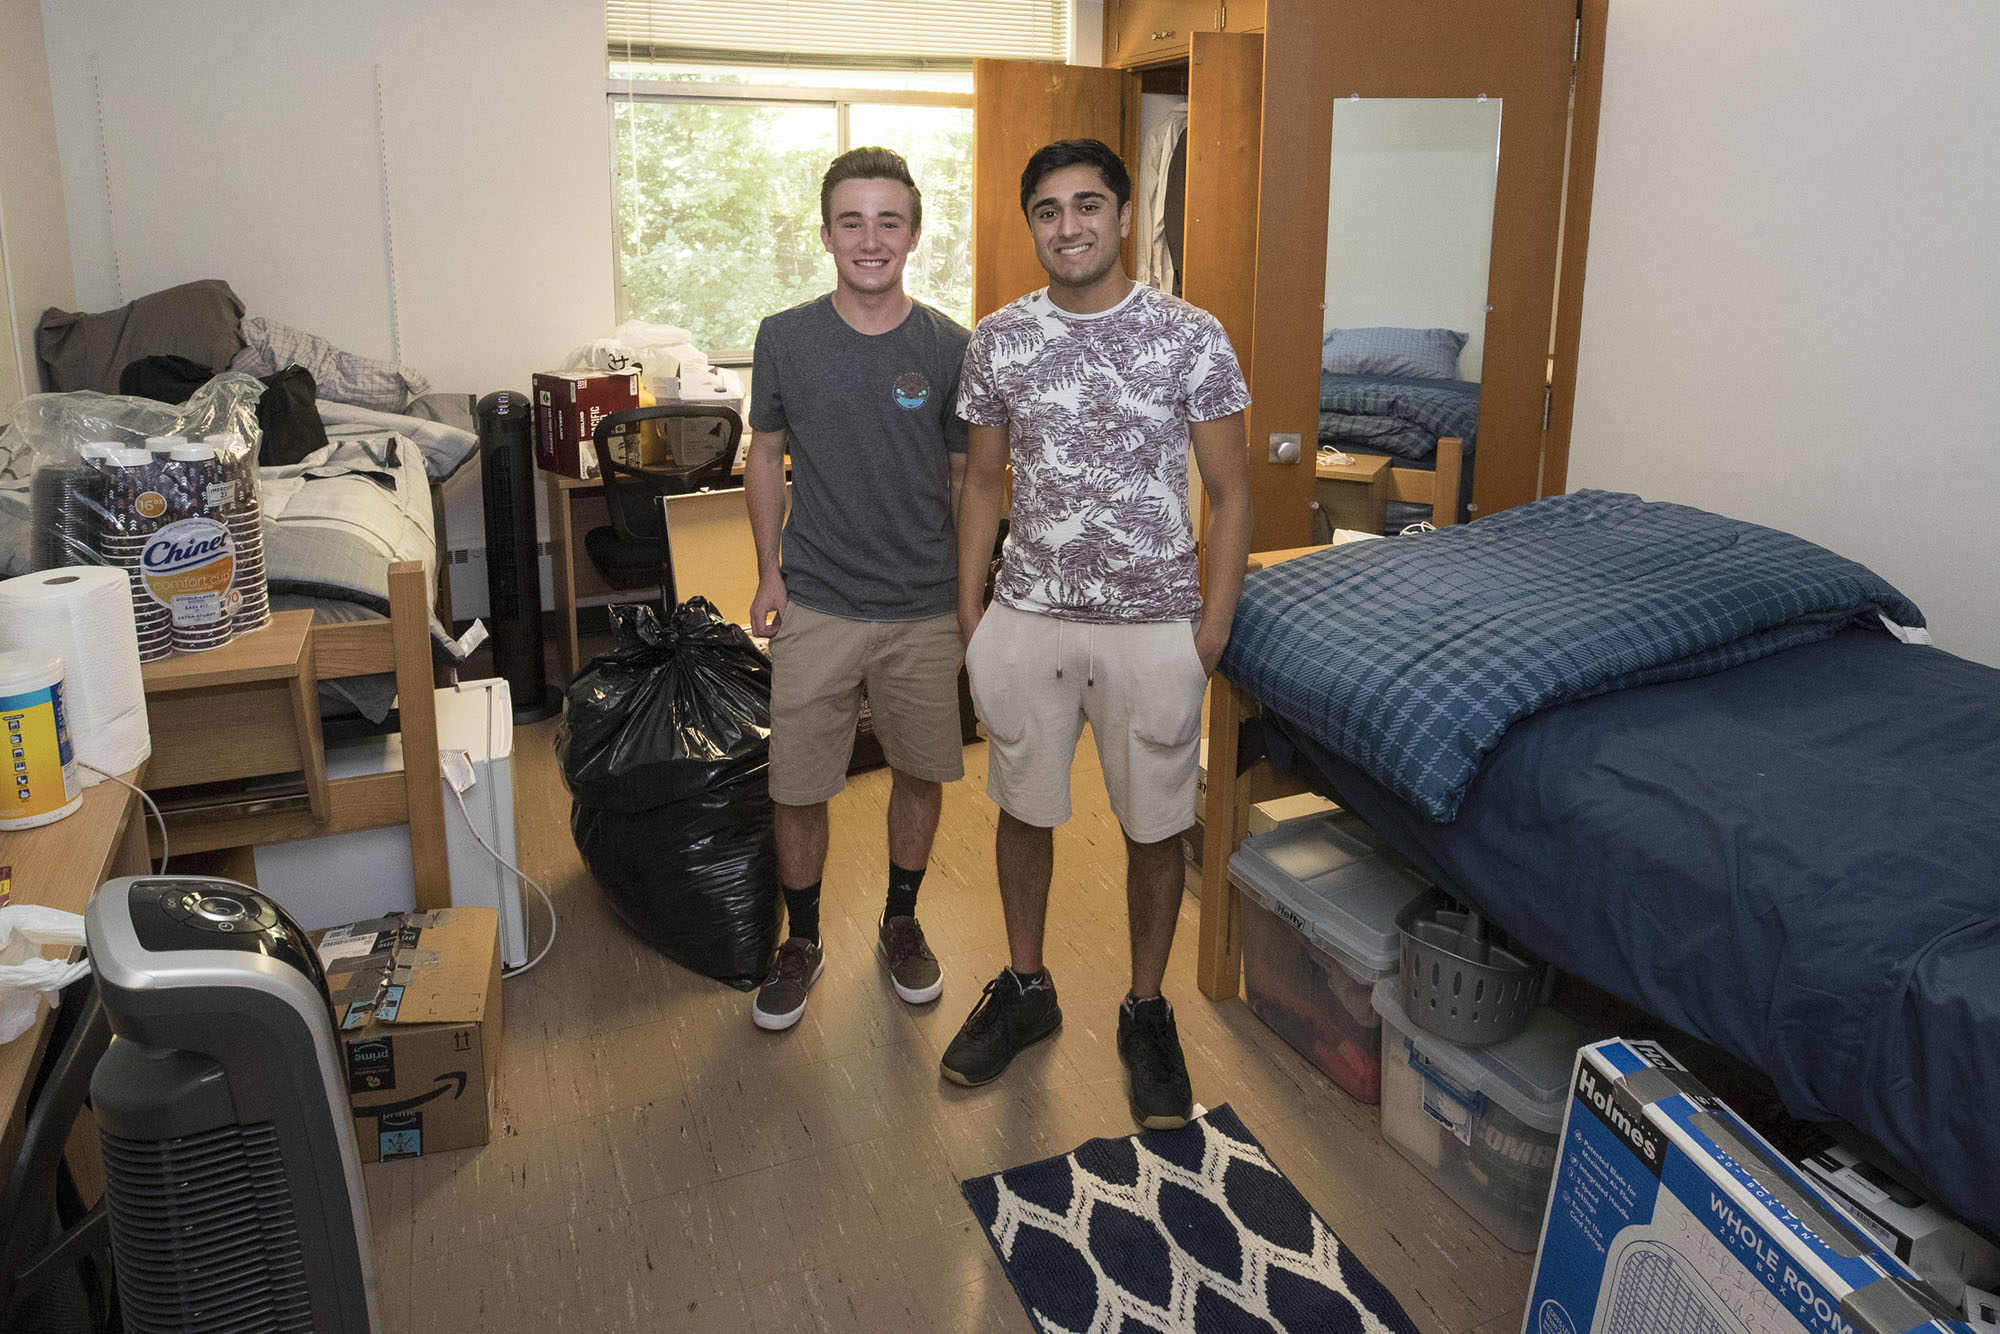 Sahil Parikh and Patrick Morris stand in their room for a picture